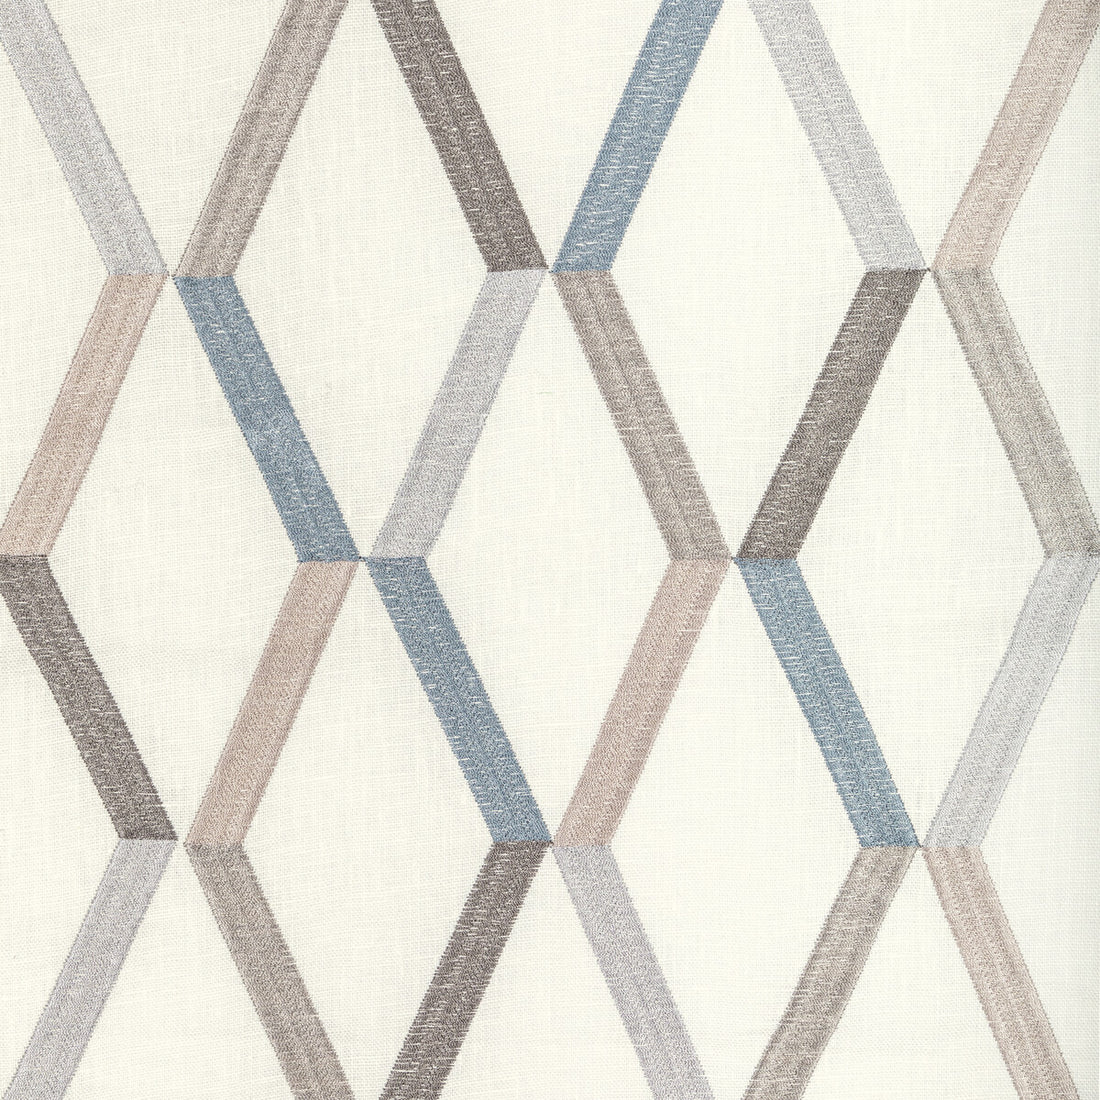 To The Max fabric in cloud color - pattern 36316.1611.0 - by Kravet Design in the Nadia Watts Gem collection